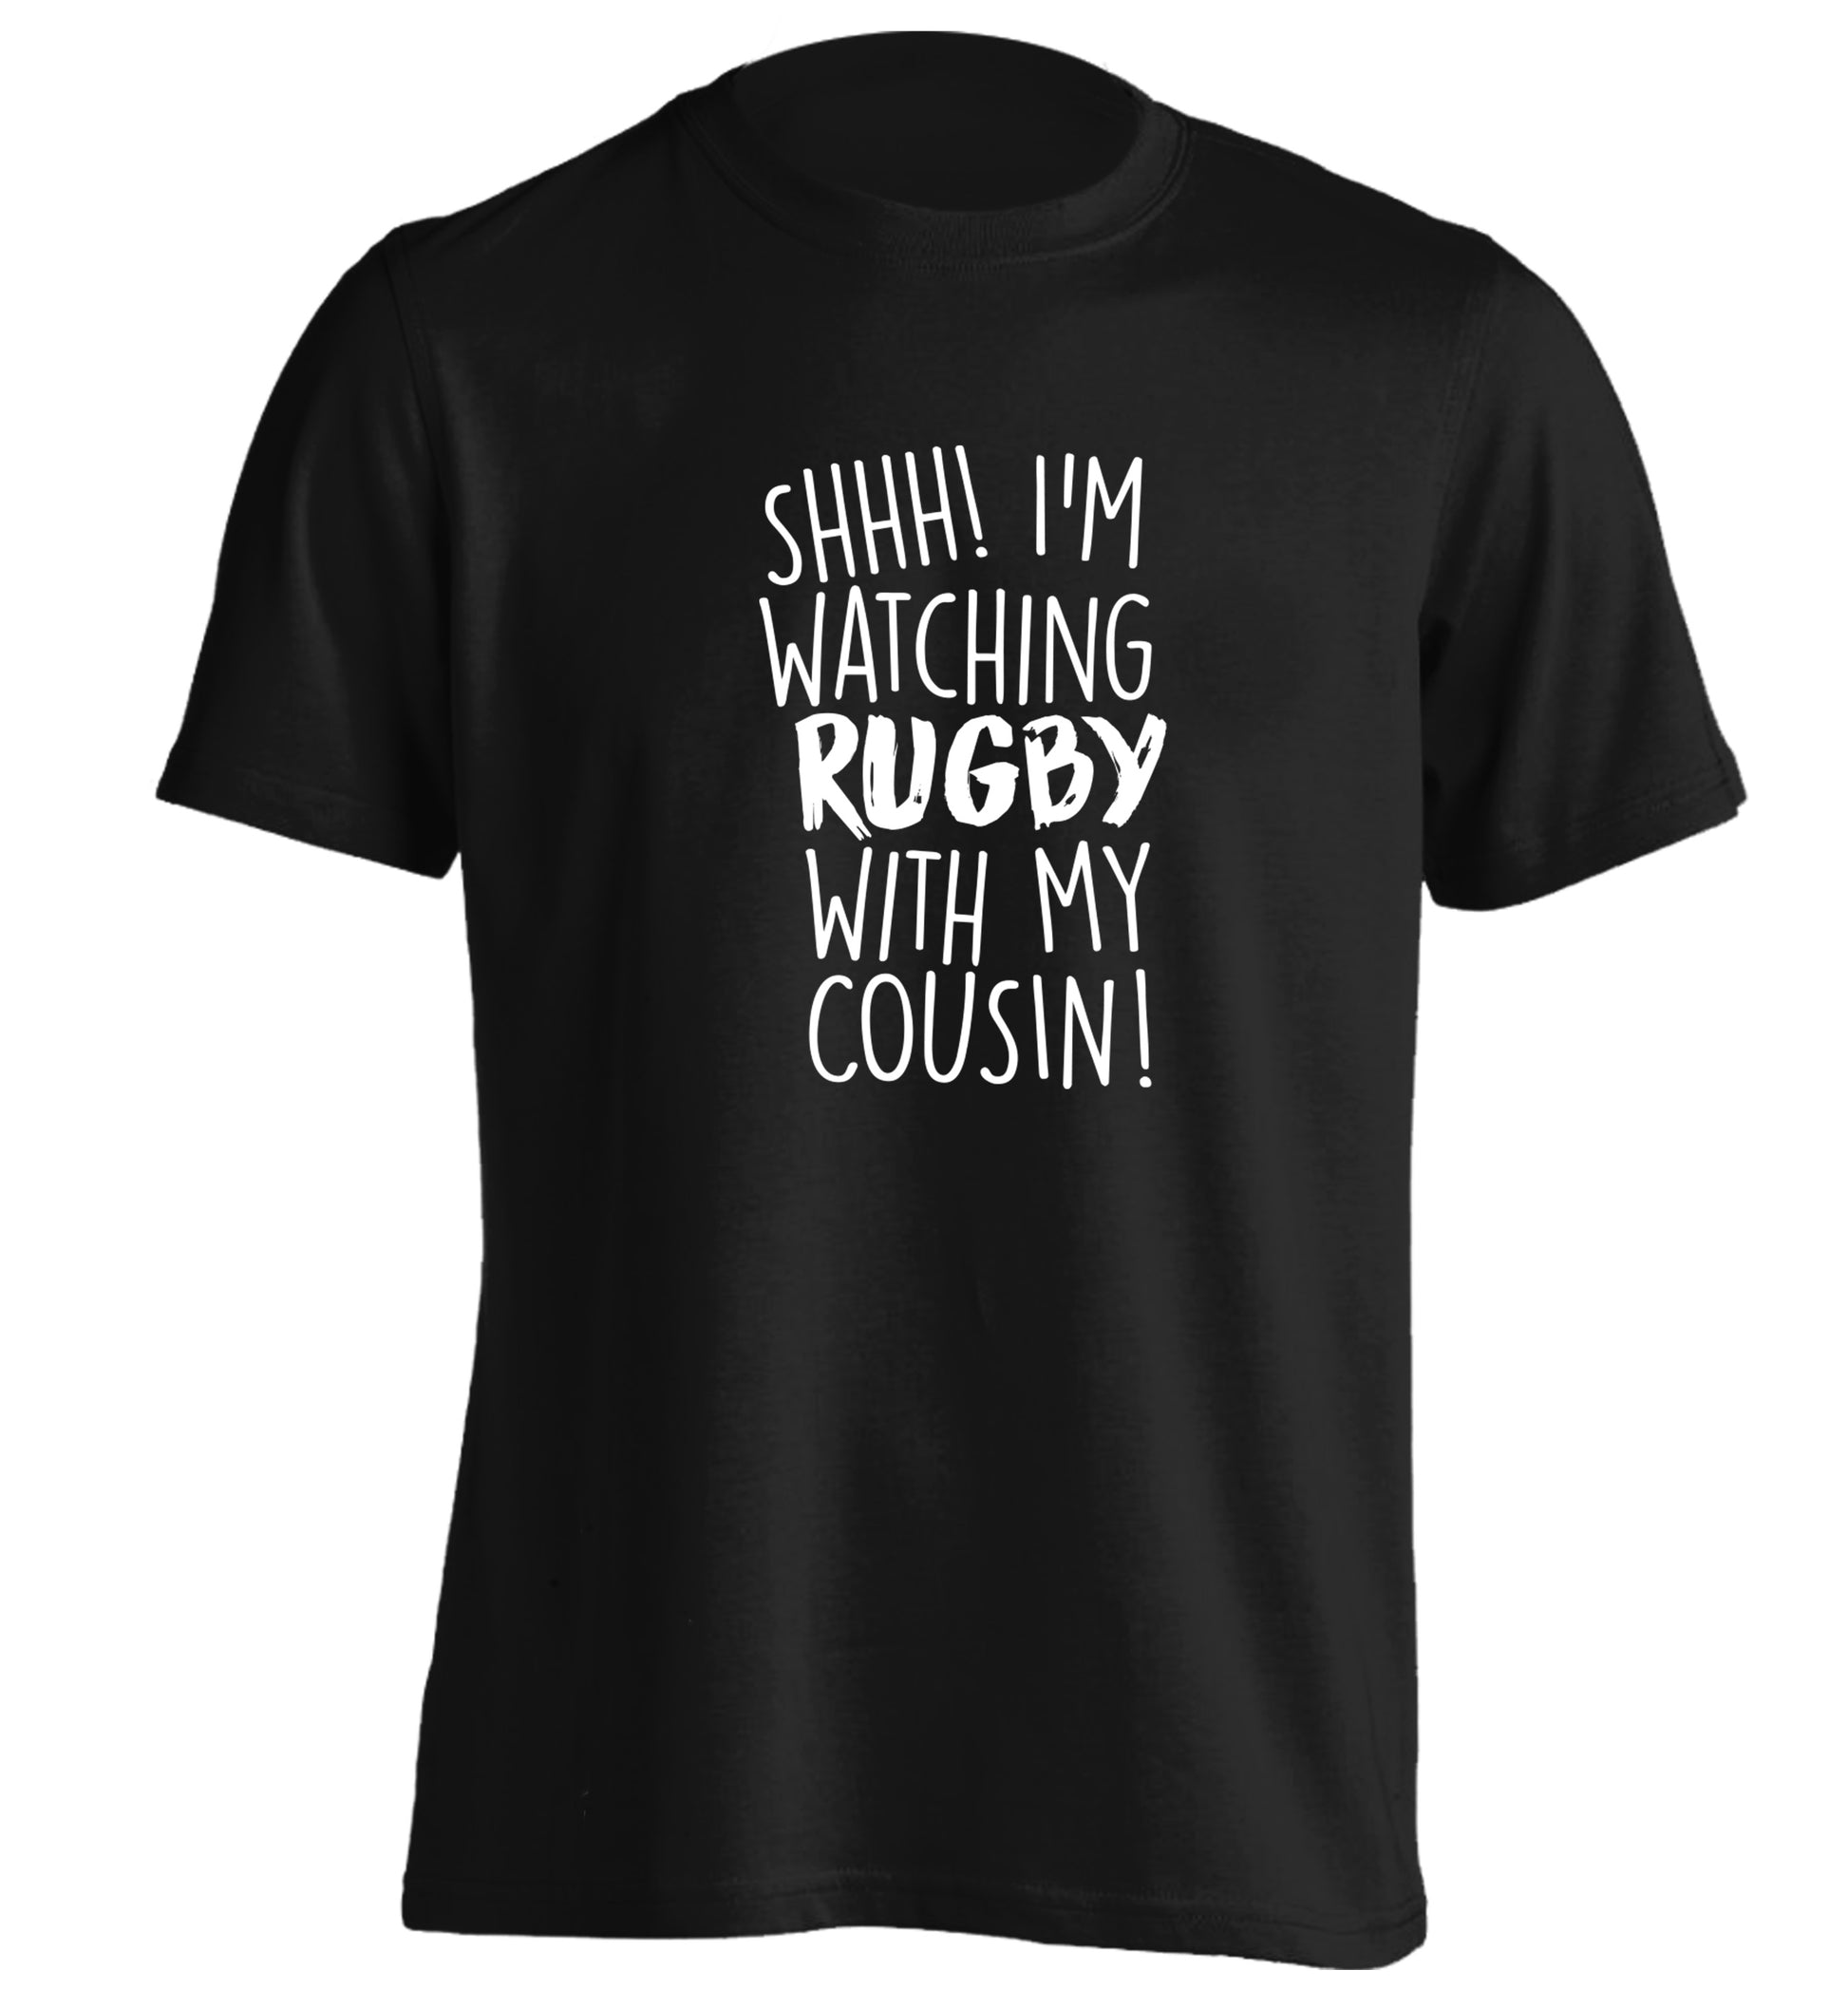 Shhh I'm watching rugby with my cousin adults unisex black Tshirt 2XL